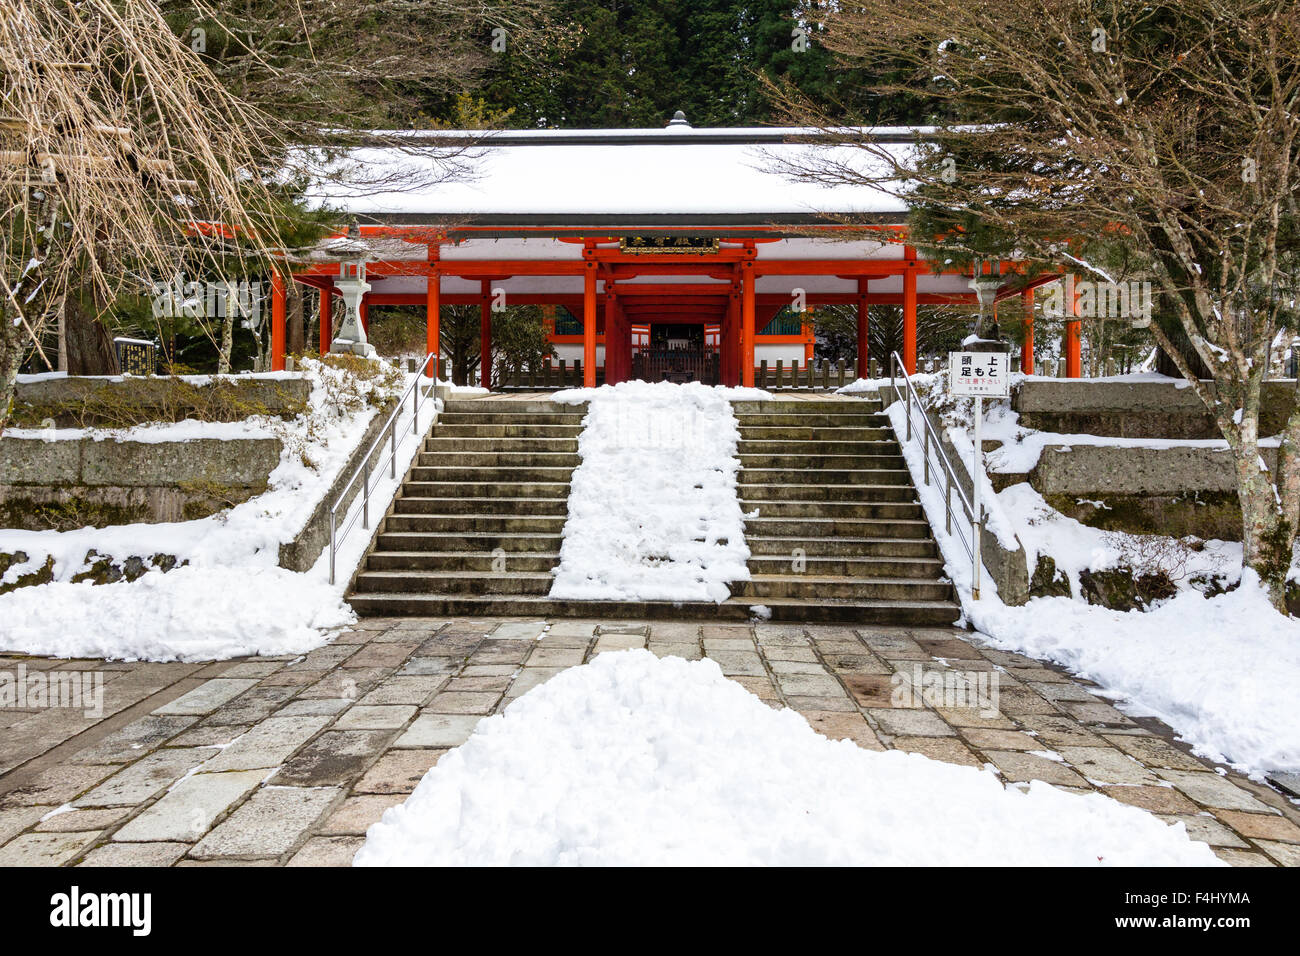 Koyasan, Japan, Okunoin cemetery, Japan's largest. The Shinto shrine,  Hall of Heroes, second world war memorial for the Japanese dead. Winter, snow. Stock Photo